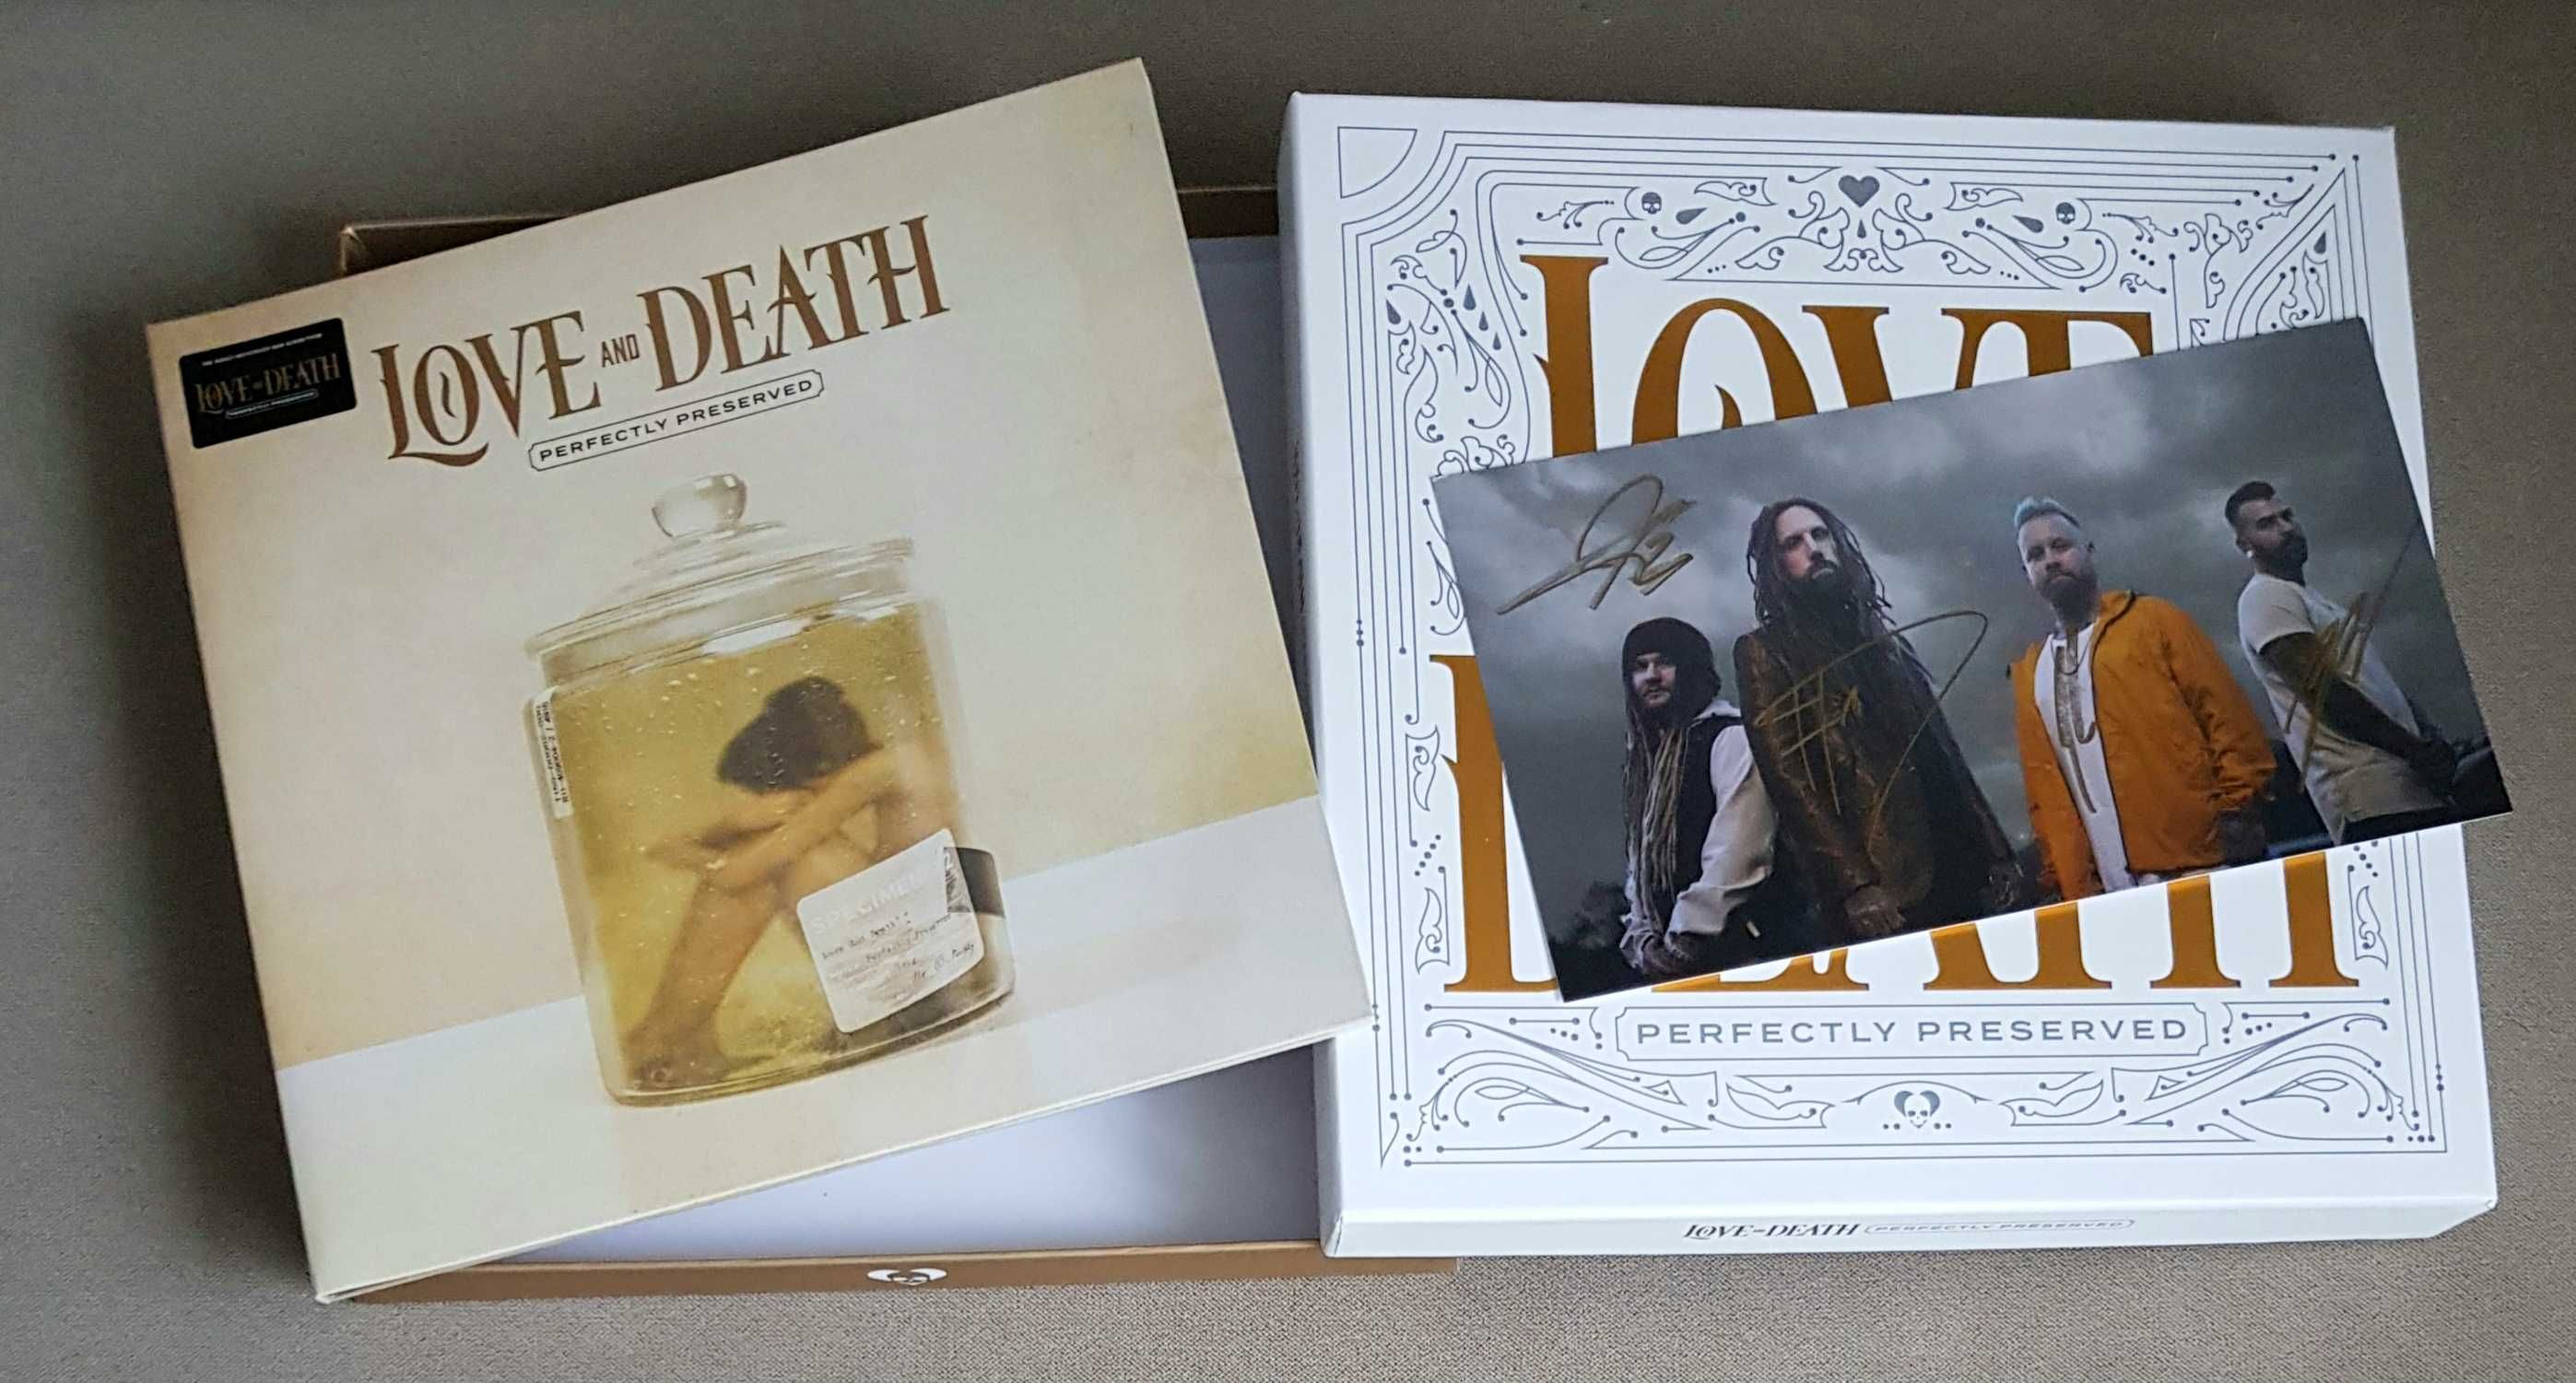 Love And Death - Perfectly Preserved Crystal Clear Vinyl Box Set